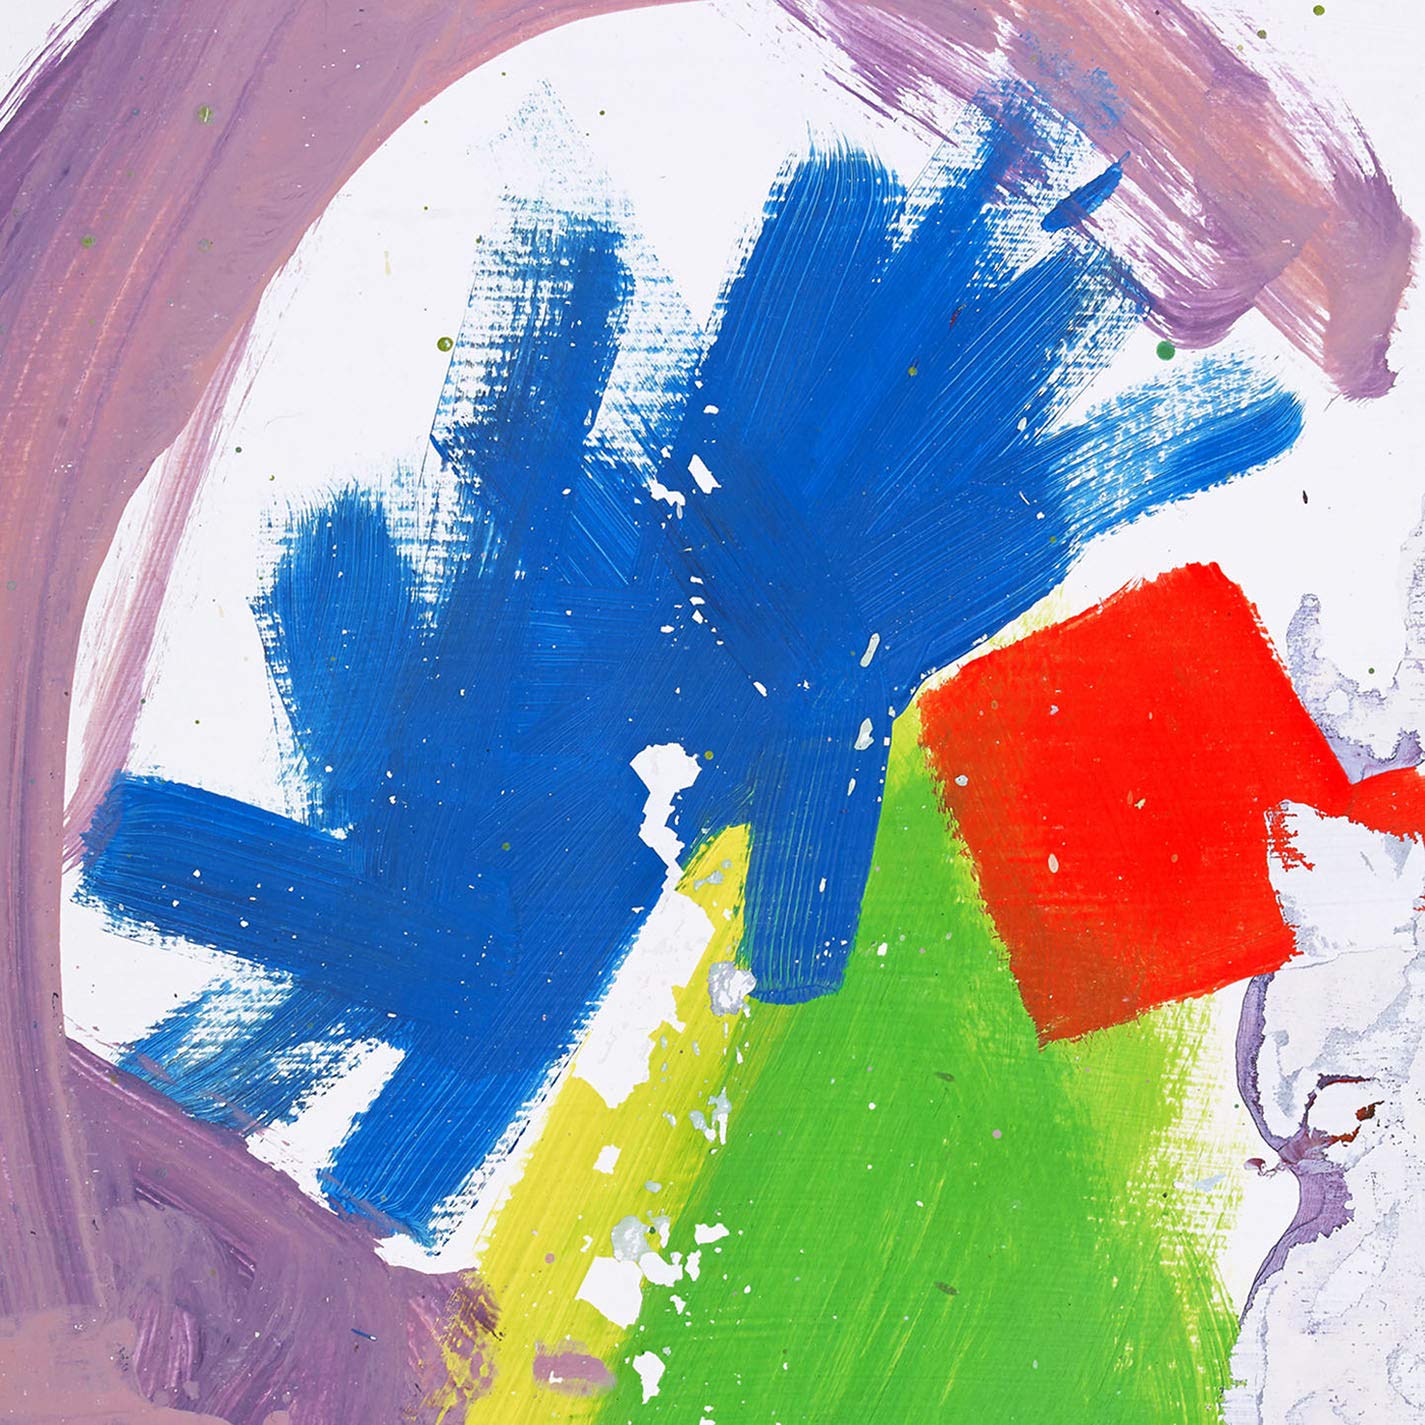 Alt-J "This is All Yours" Coloured 2LP